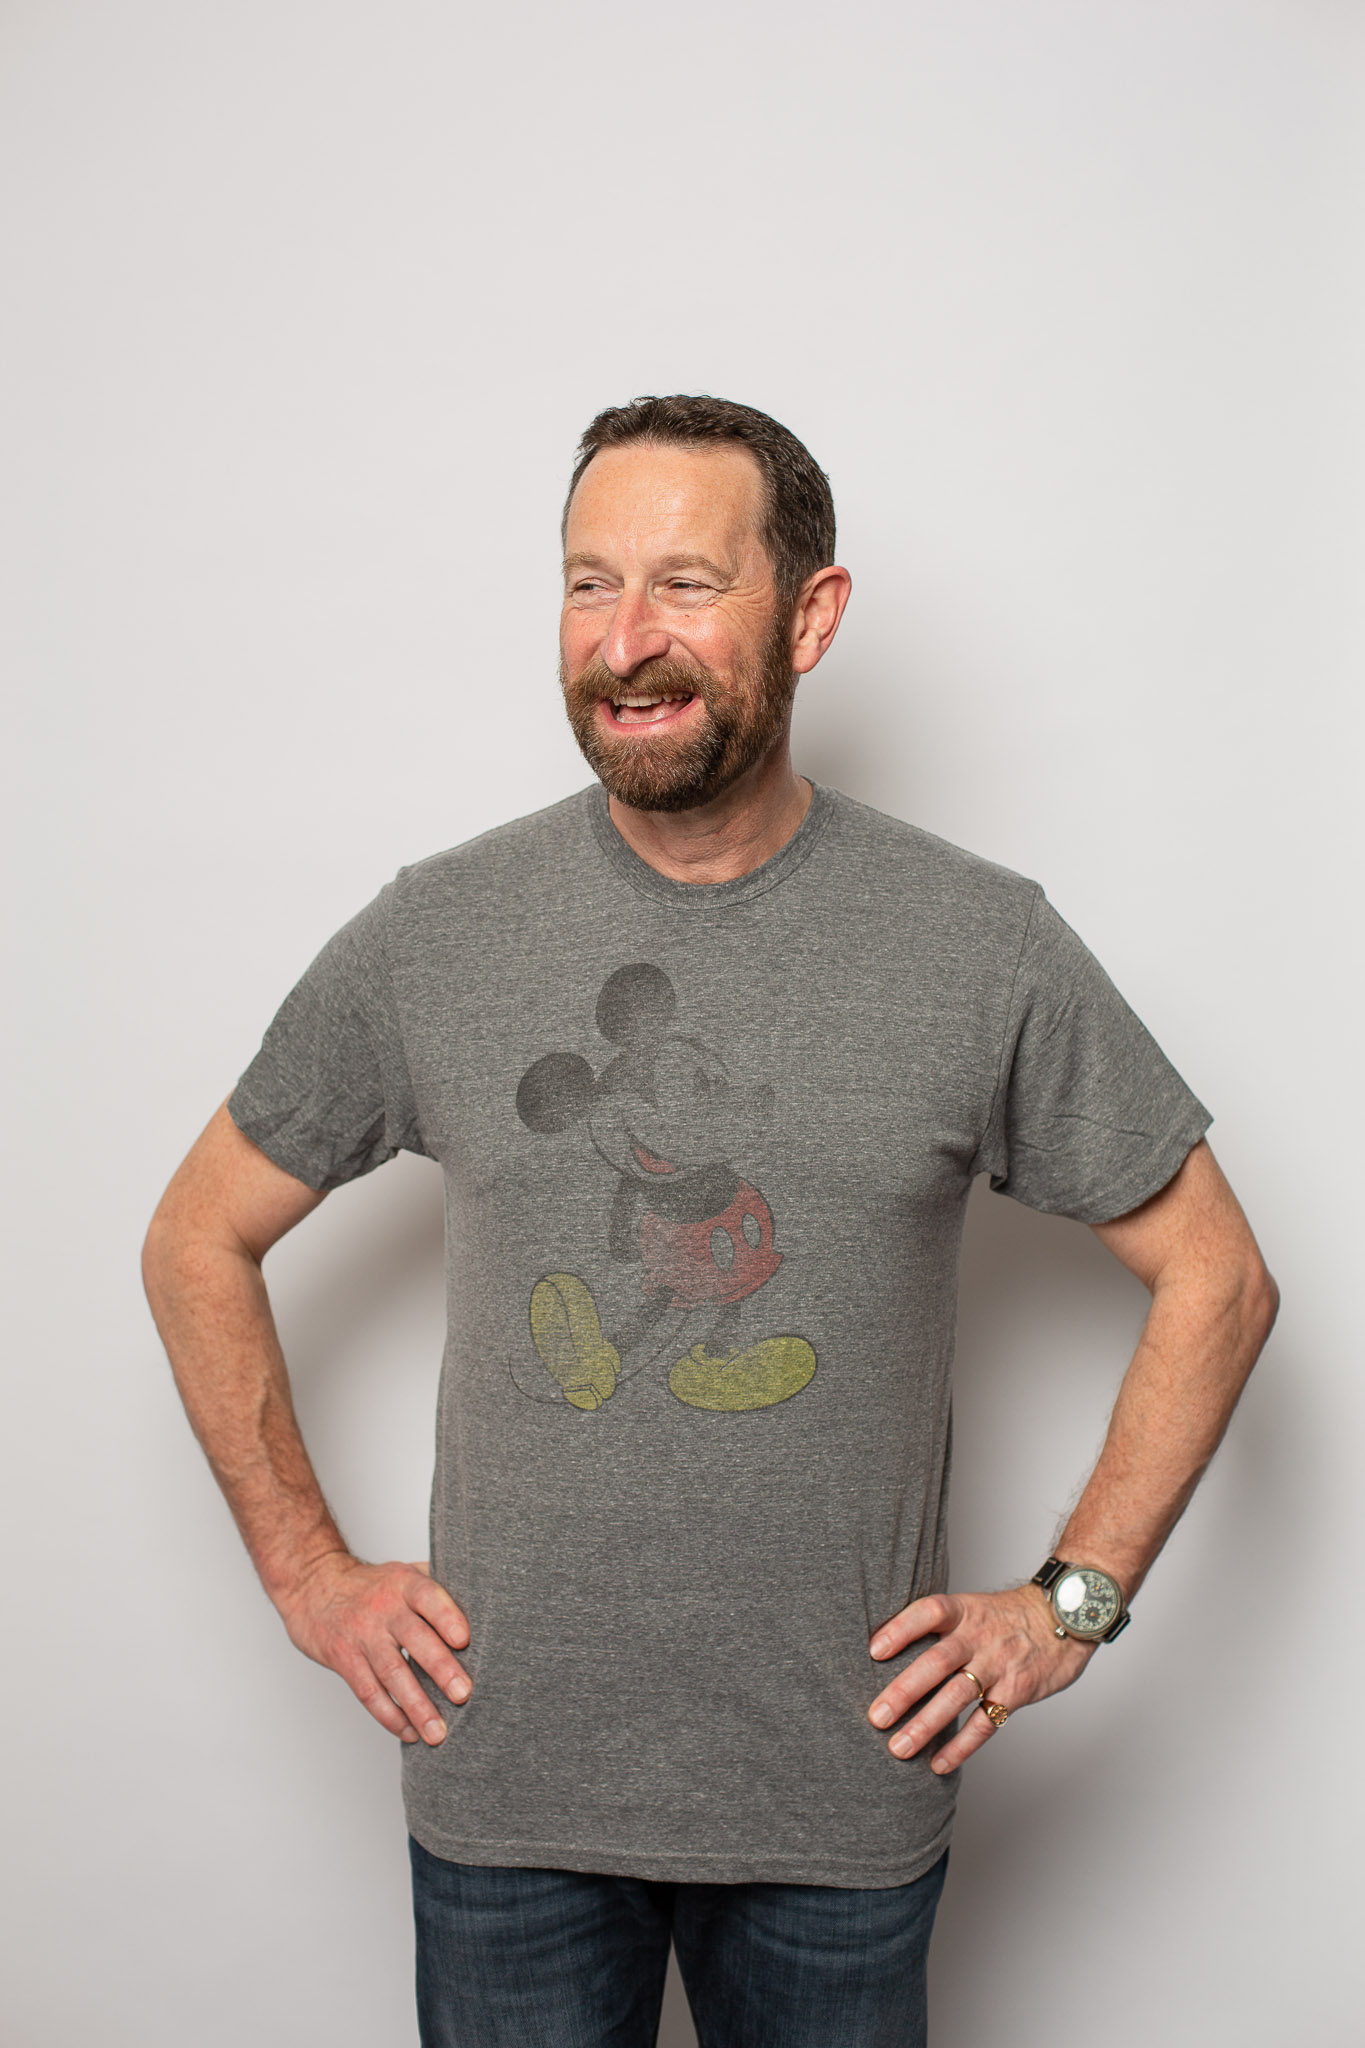  Duncan Wardle on a white backdrop with a grey Mickey Mouse T Shirt.  